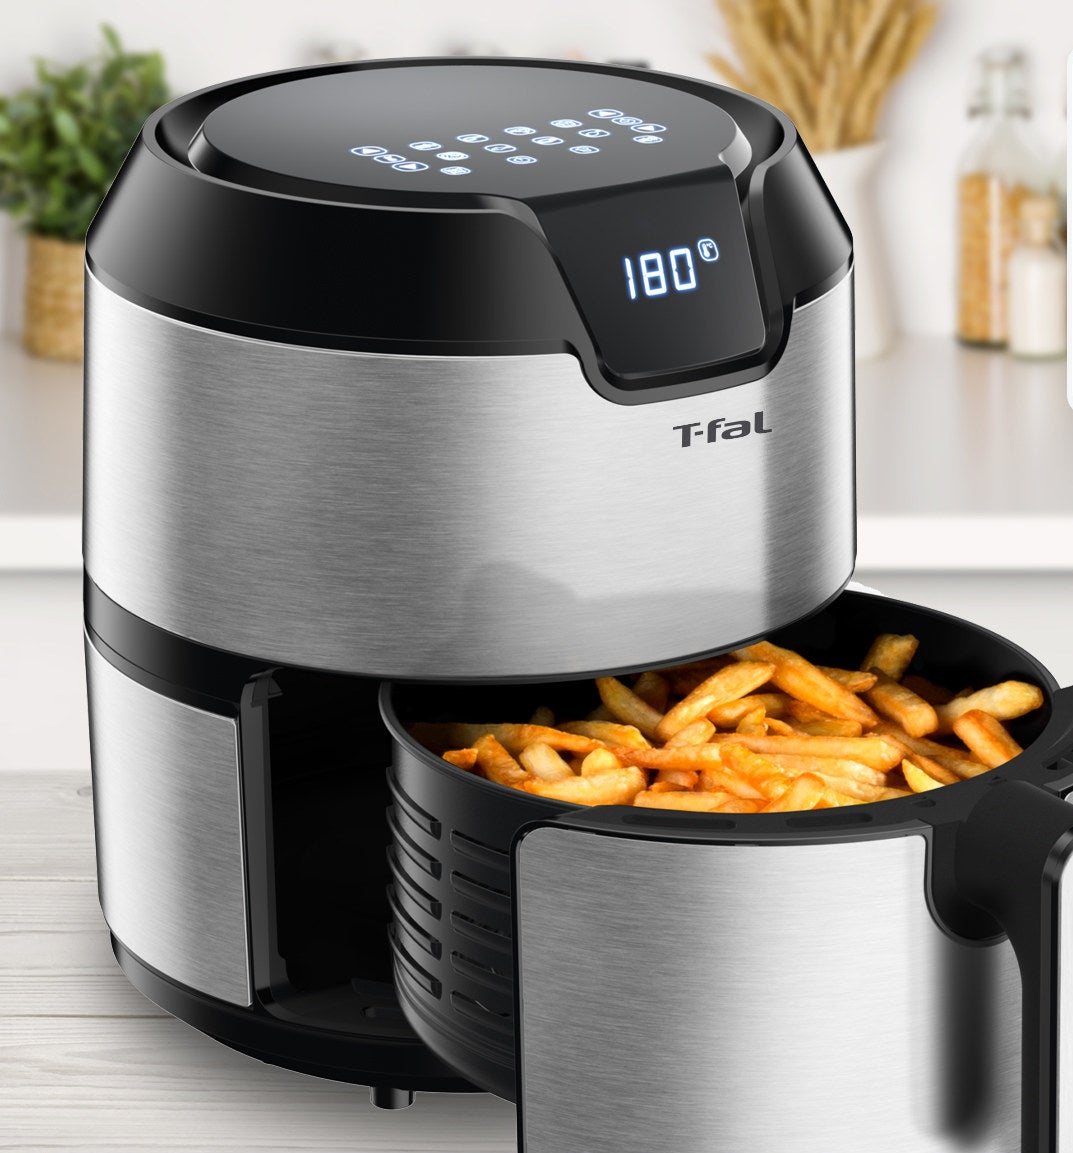 The air fryer with the interior basket full of crispy French fries